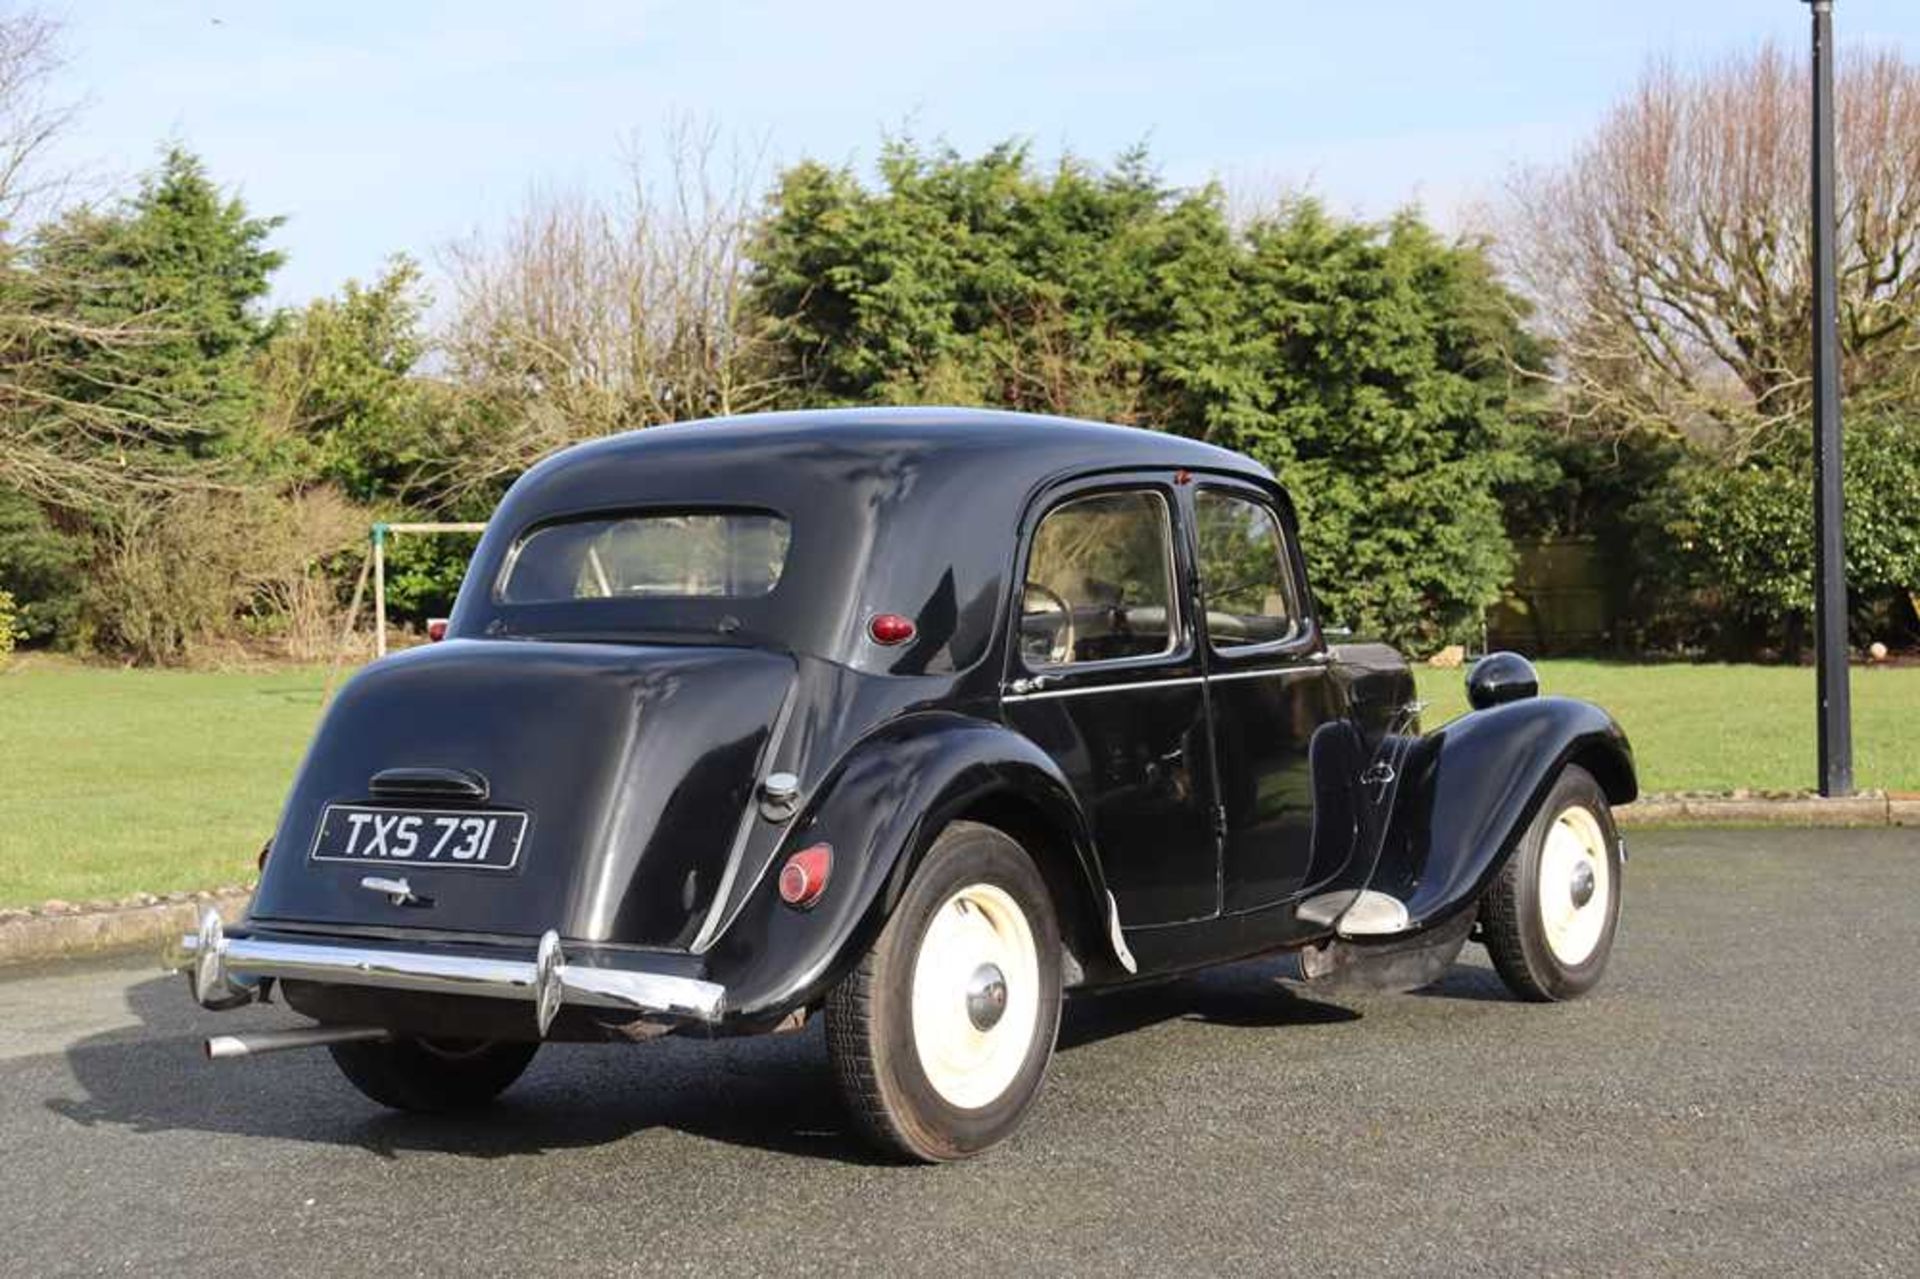 1952 Citroën 11BL Traction Avant In current ownership for over 40 years - Image 15 of 60